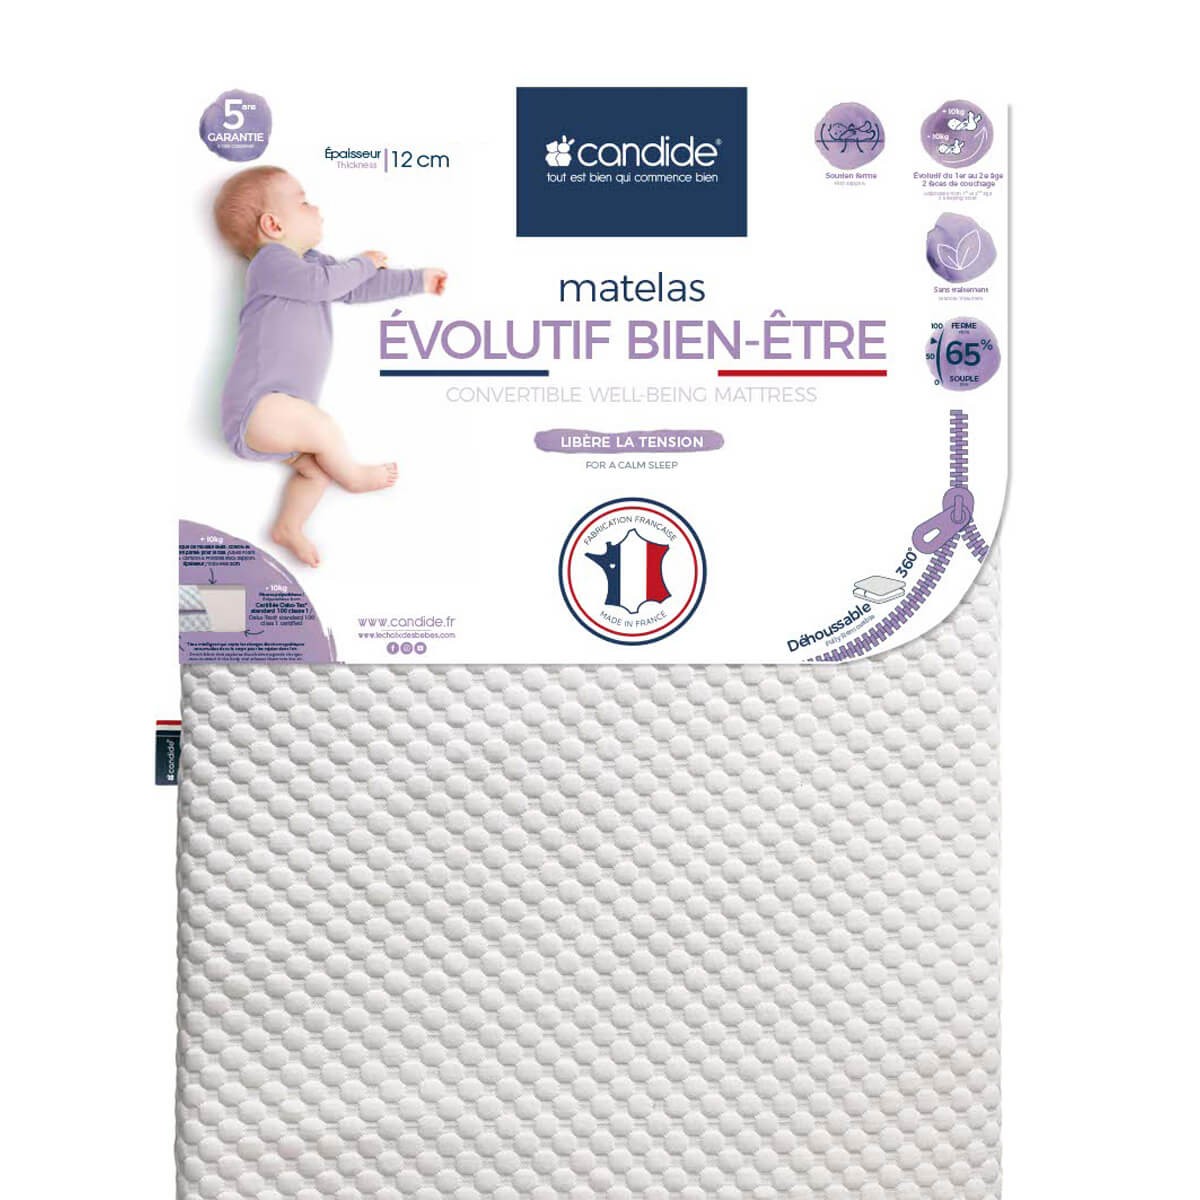 Baby mattress 70x140cm Adjustable Well-being with removable cover 360°